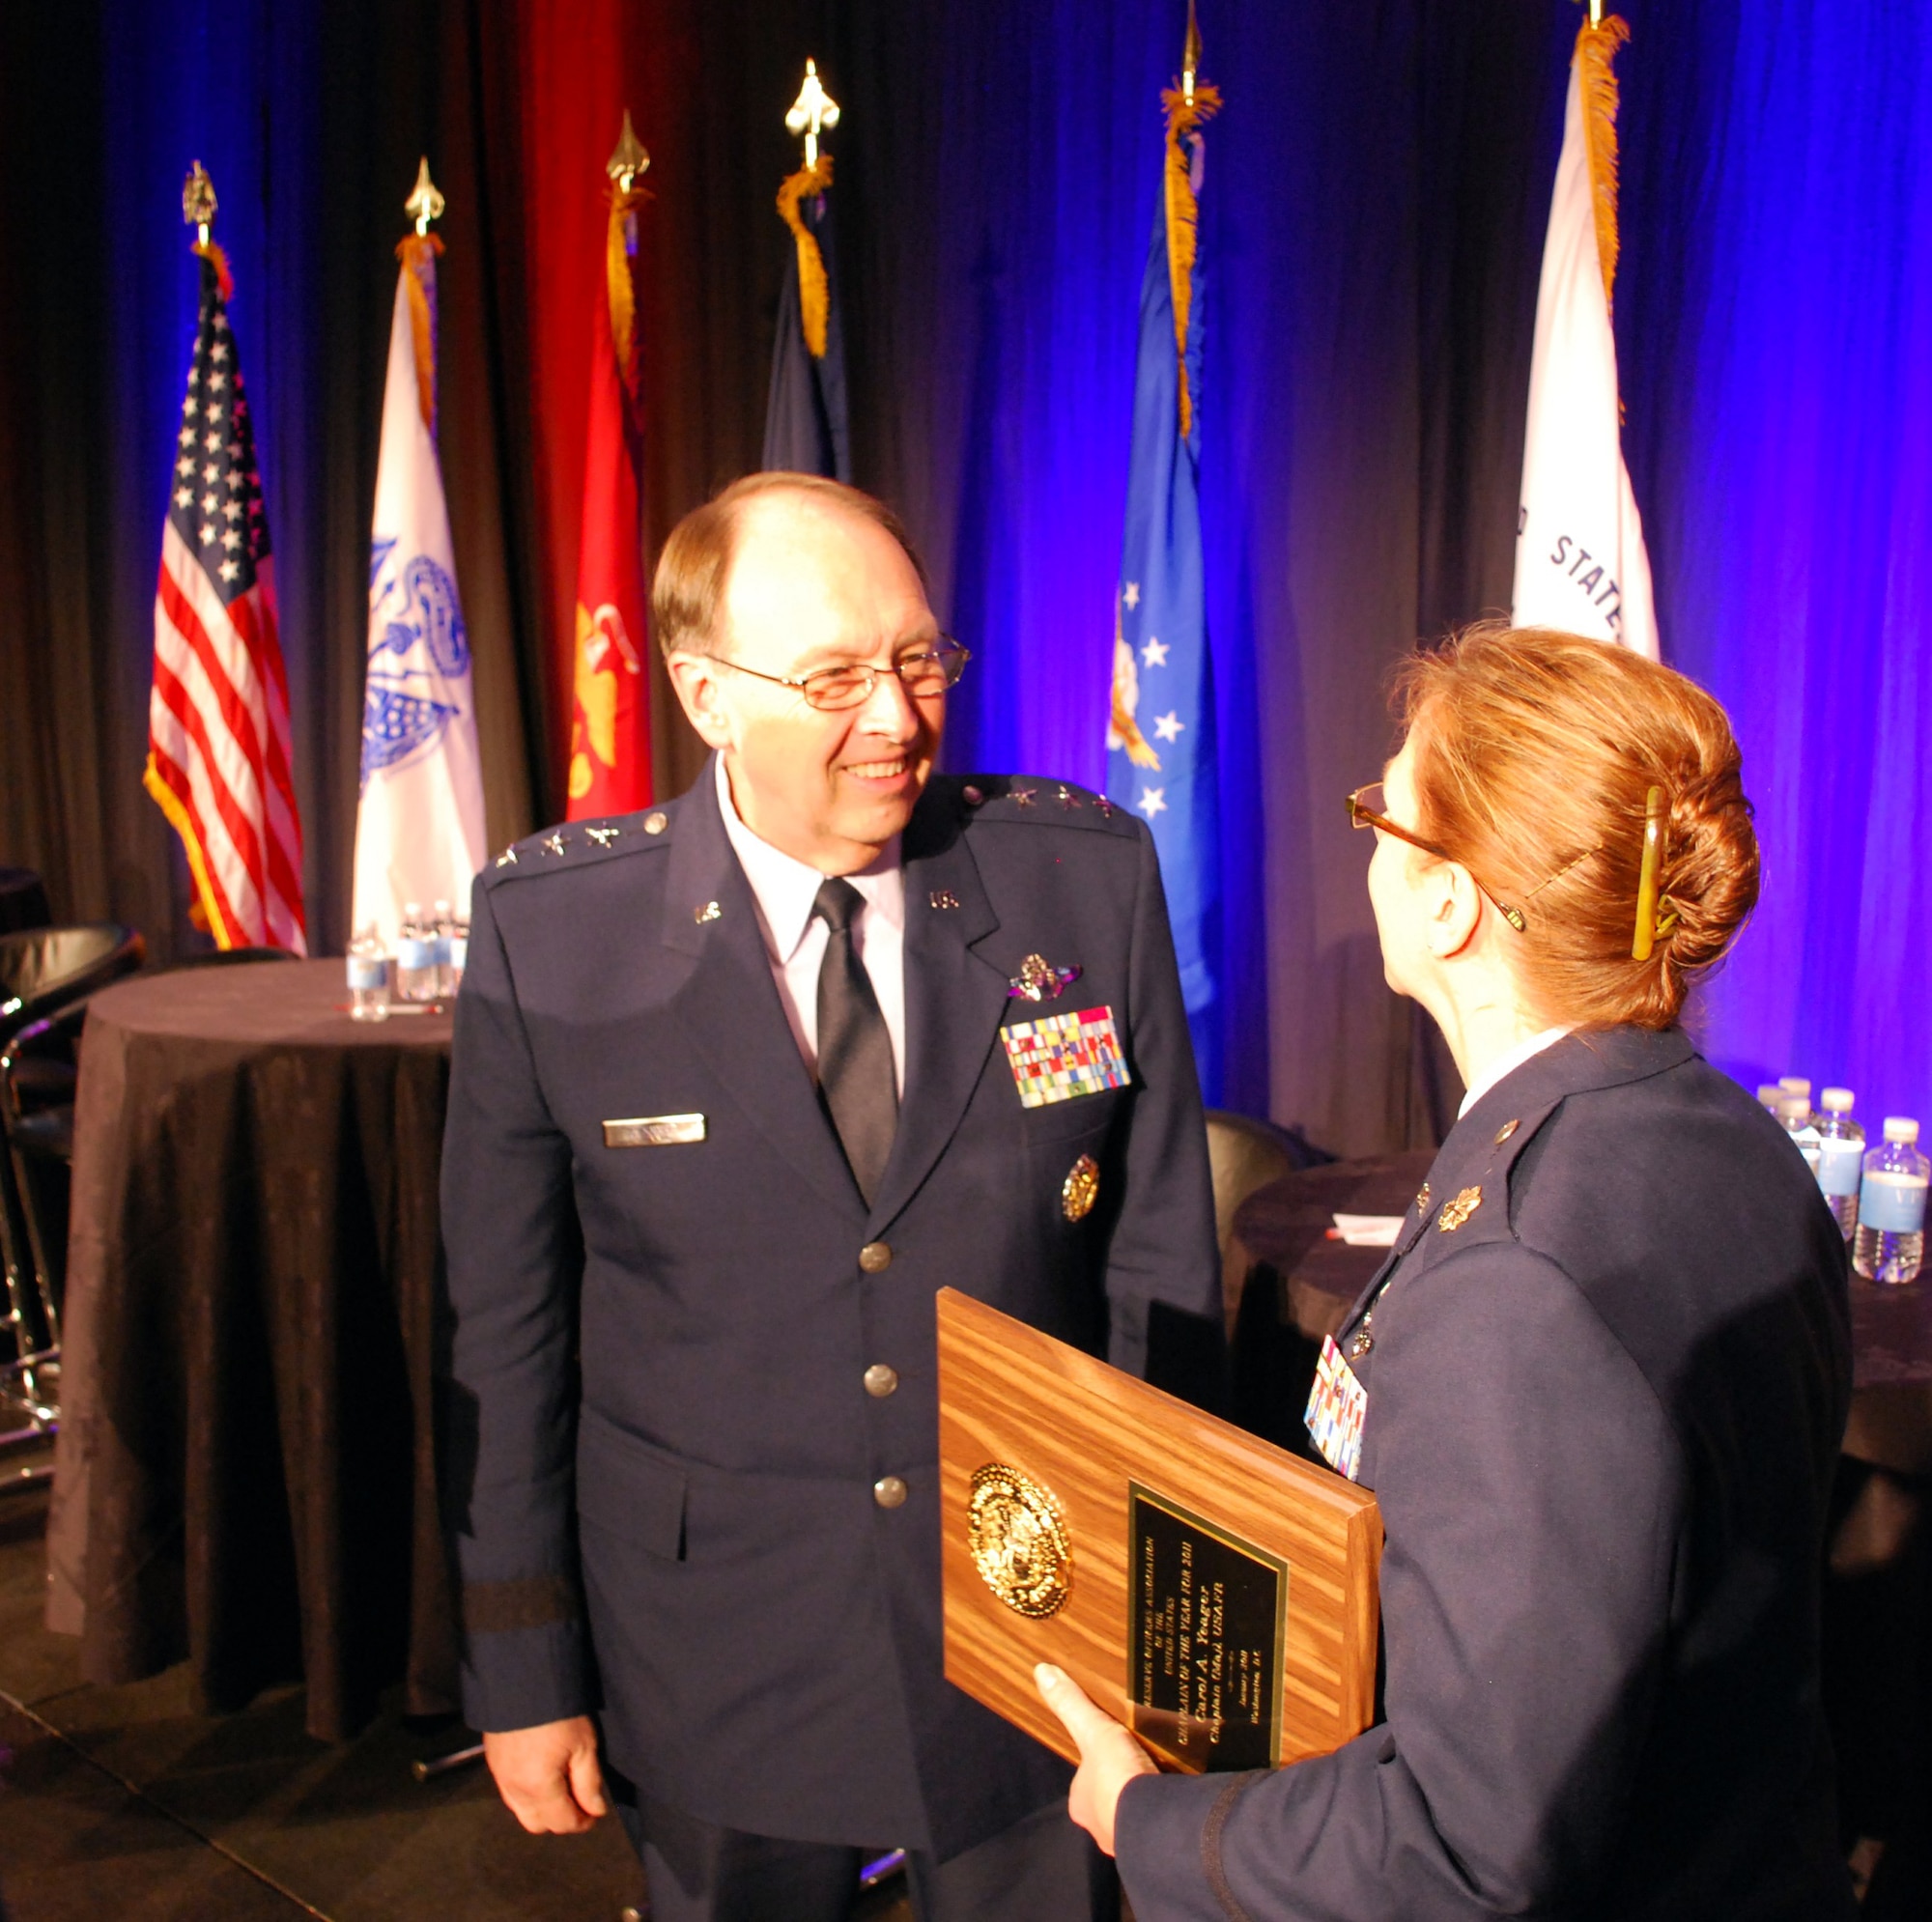 Lt. Gen. Charles E. Stenner Jr., congratulates Chaplain (Maj.) Carol A. Yeager, the Reserve Officer Association Chaplain of the Year for 2010 during the ROA National Security Symposium in Washington, D.C., on Jan. 31, 2011. General Stenner, chief of the Air Force Reserve, and commander of Air Force Reserve Command, told the crowd gathered at the ROA symposium that the efficiency and cost-effectiveness of the Air Force Reserve is being discussed by the highest levels of leadership as they re-balance regular and reserve component structures. (U.S. Air Force photo/Col. Bob Thompson)